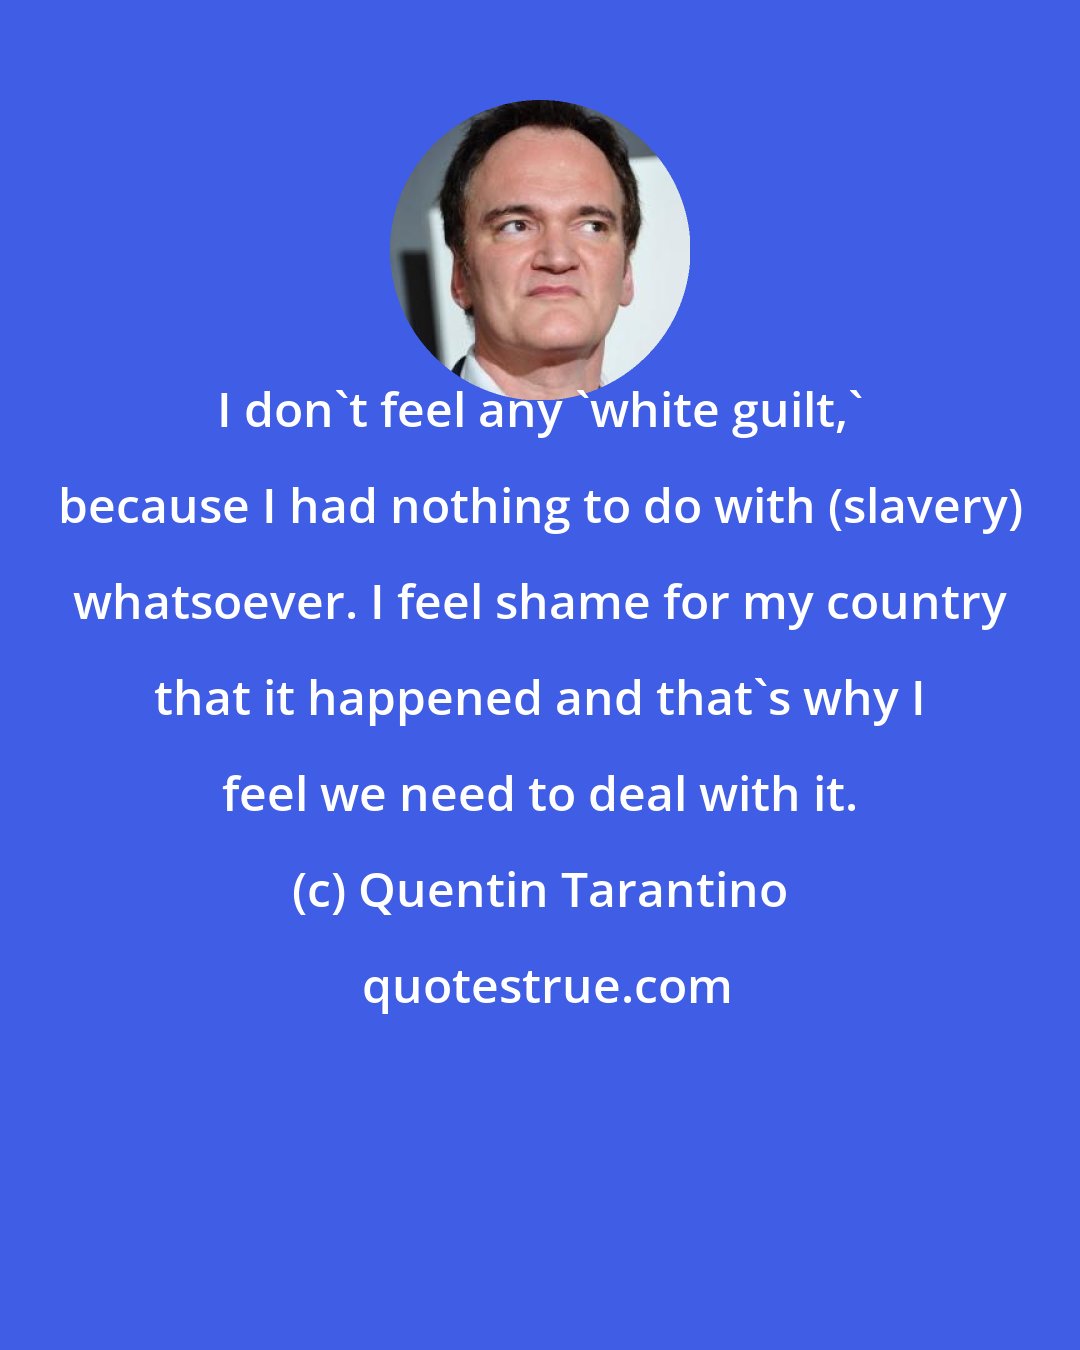 Quentin Tarantino: I don't feel any 'white guilt,' because I had nothing to do with (slavery) whatsoever. I feel shame for my country that it happened and that's why I feel we need to deal with it.